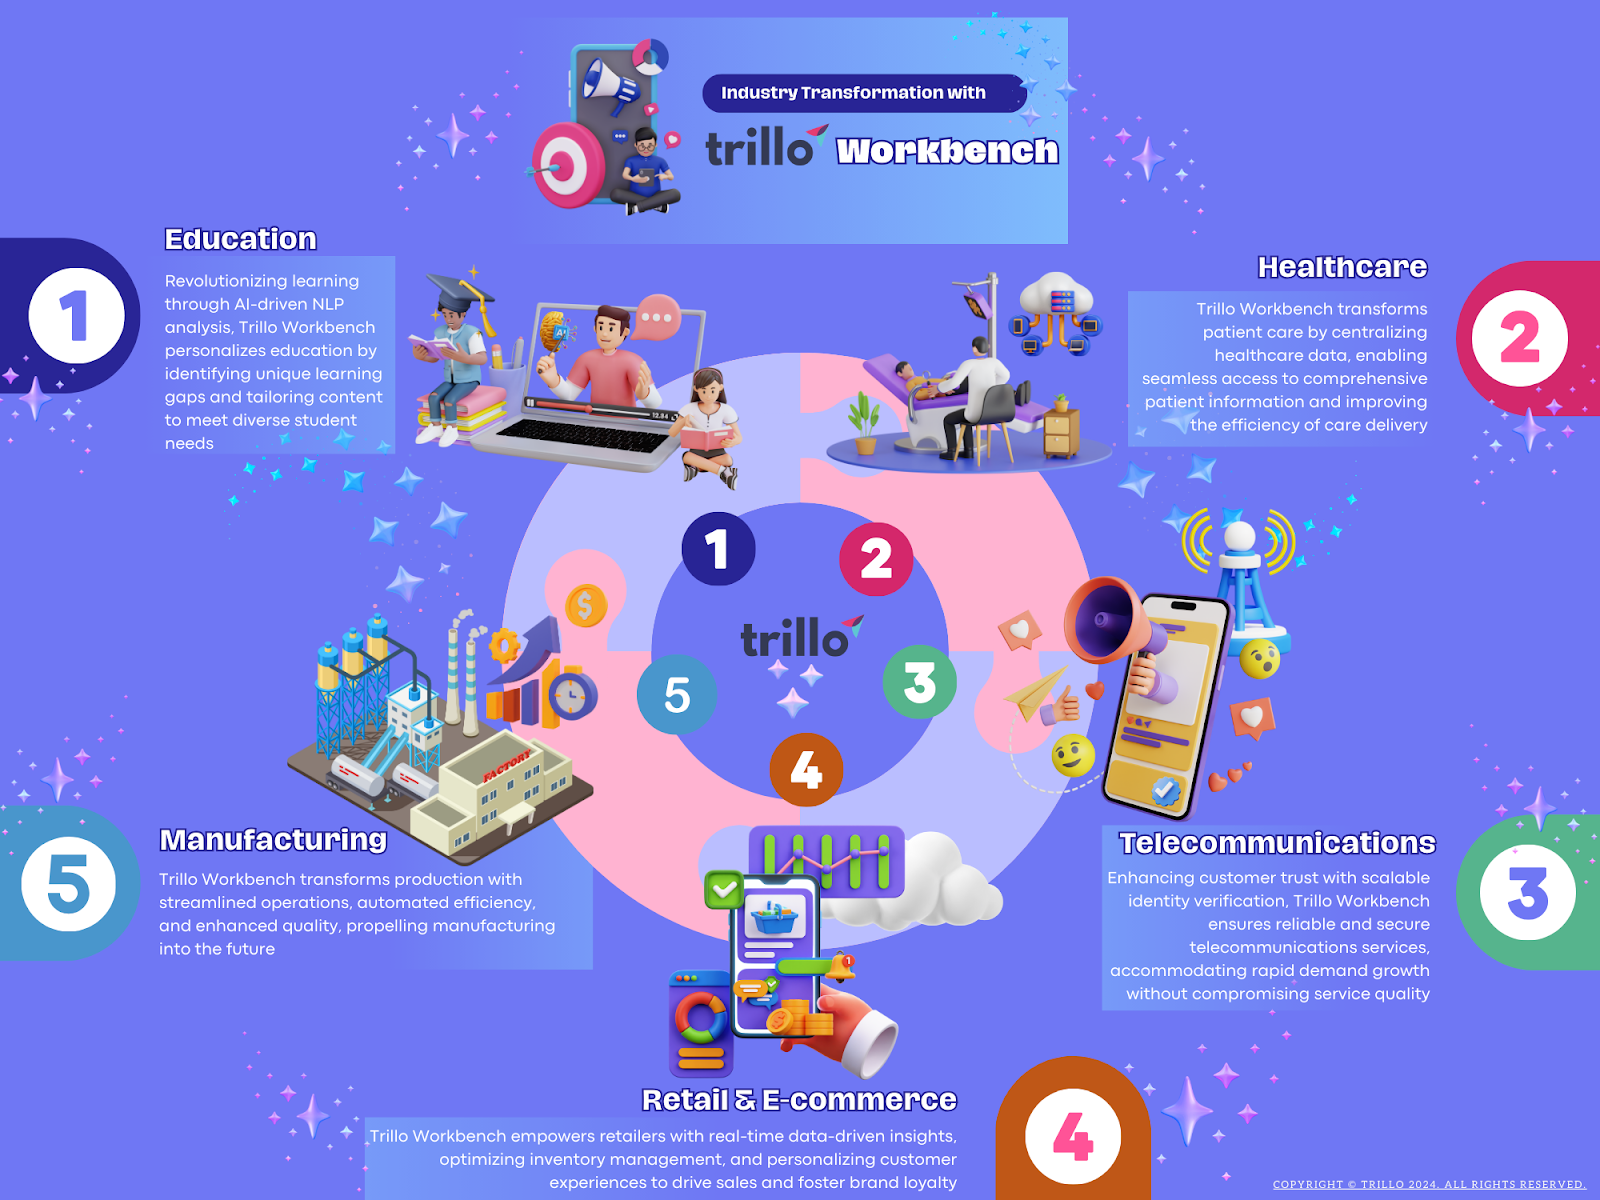 This infographic provides an overview of how Trillo Workbench has revolutionized industries by enhancing educational experiences through advanced NLP, centralizing healthcare data for improved patient care, scaling telecommunications services with robust identity verification, leveraging data-driven insights in retail for strategic decision-making, and streamlining manufacturing processes for increased efficiency.